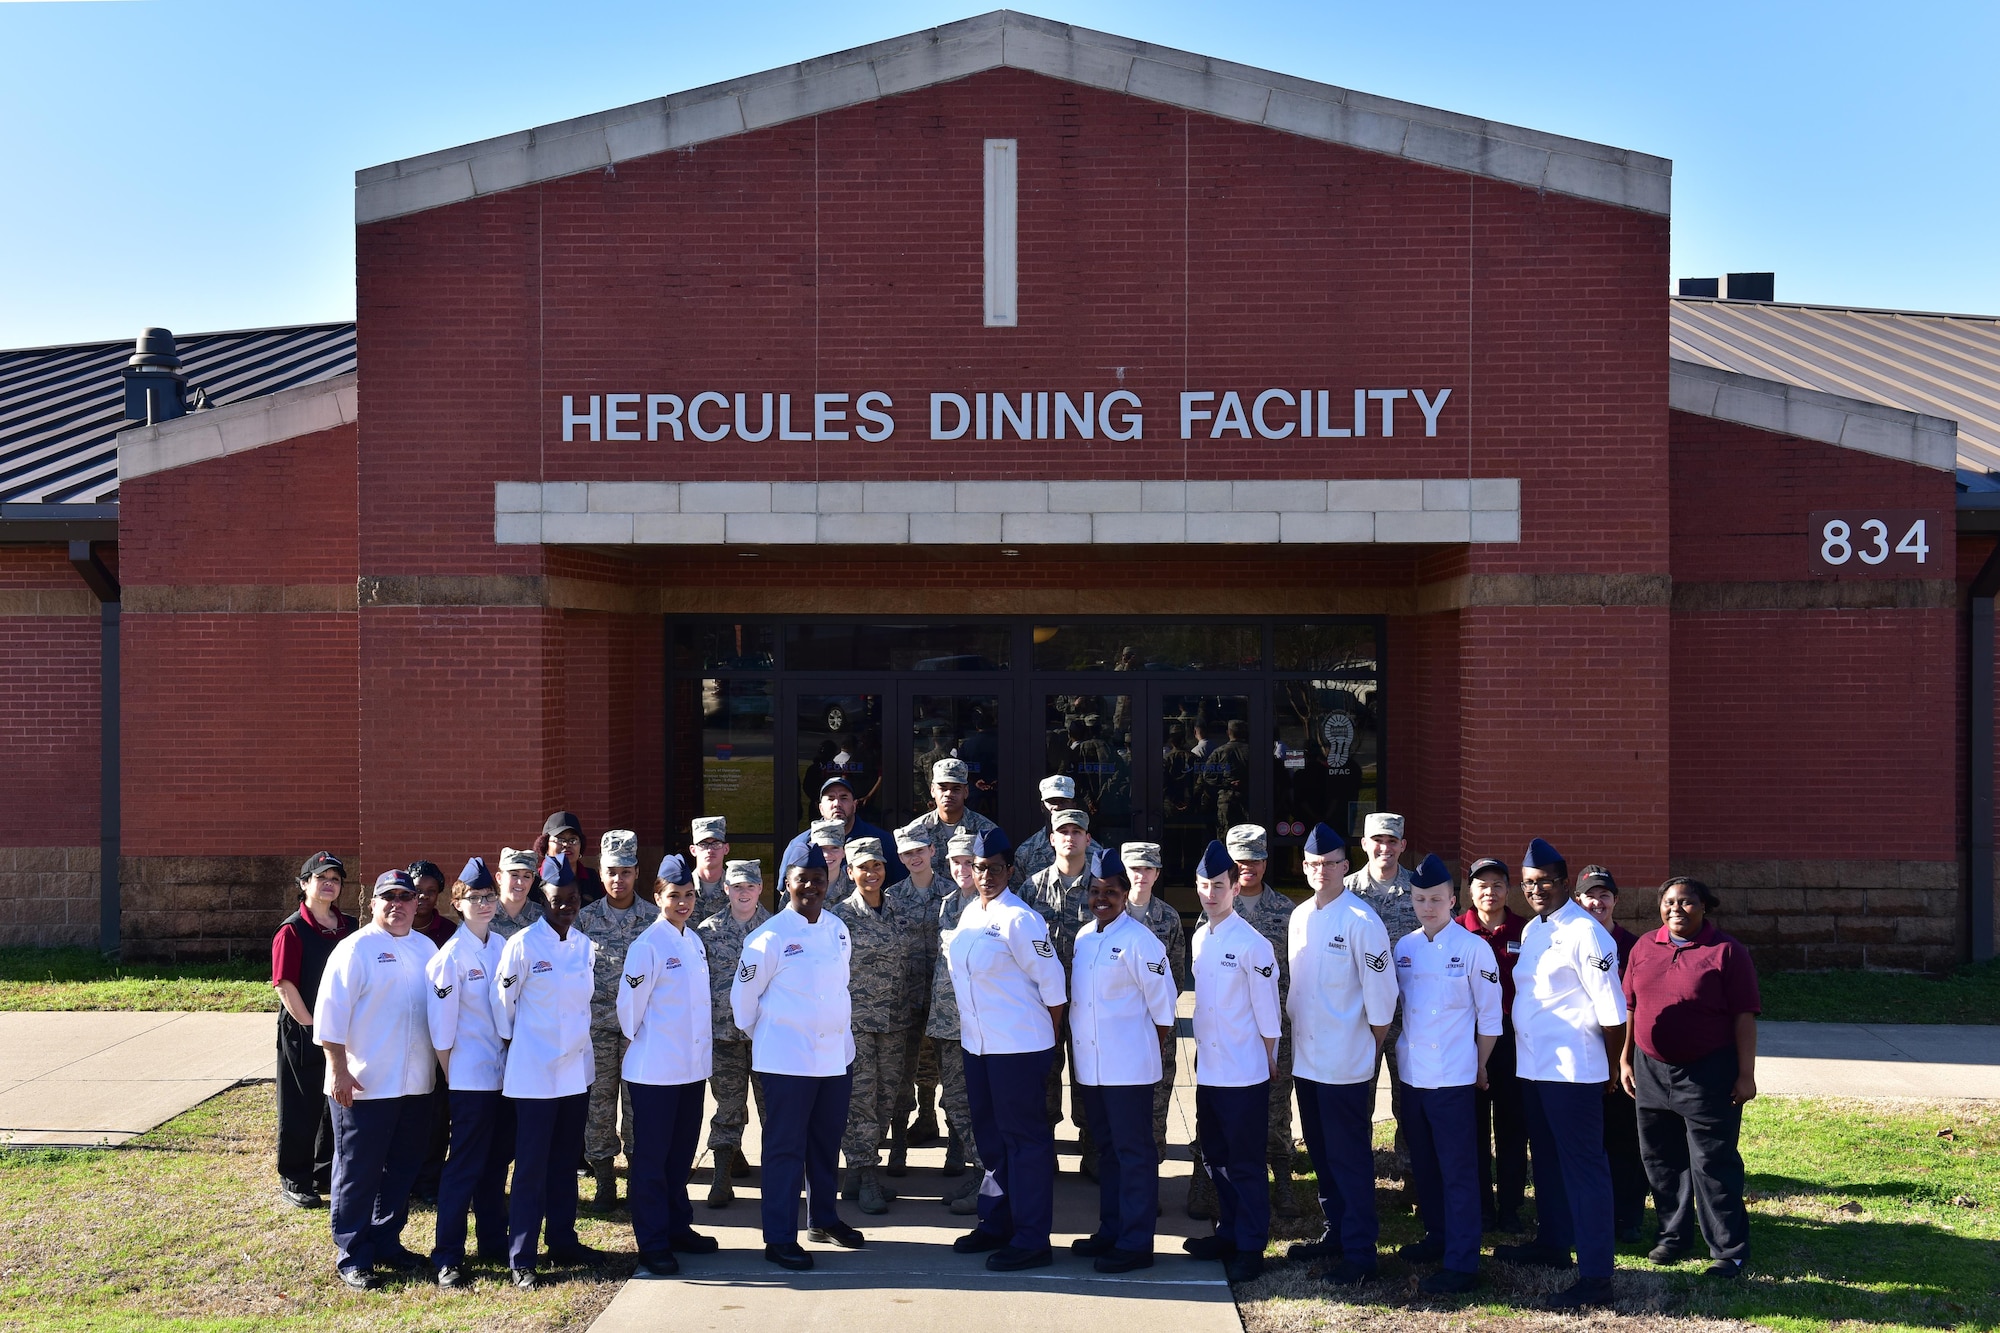 Hercules Dining Facility staff won the 2017 U.S. Air Force Hennessy award against five Major Command-nominated bases March 24, 2017, at Little Rock Air Force Base, Ark. The John L. Hennessy trophy is an annual award presented to the best food service program in the U.S. Air Force across the globe. The Hennessy award is based on the entire scope of an installation's food service program. (U.S. Air Force photo by Staff Sgt. Jeremy McGuffin)